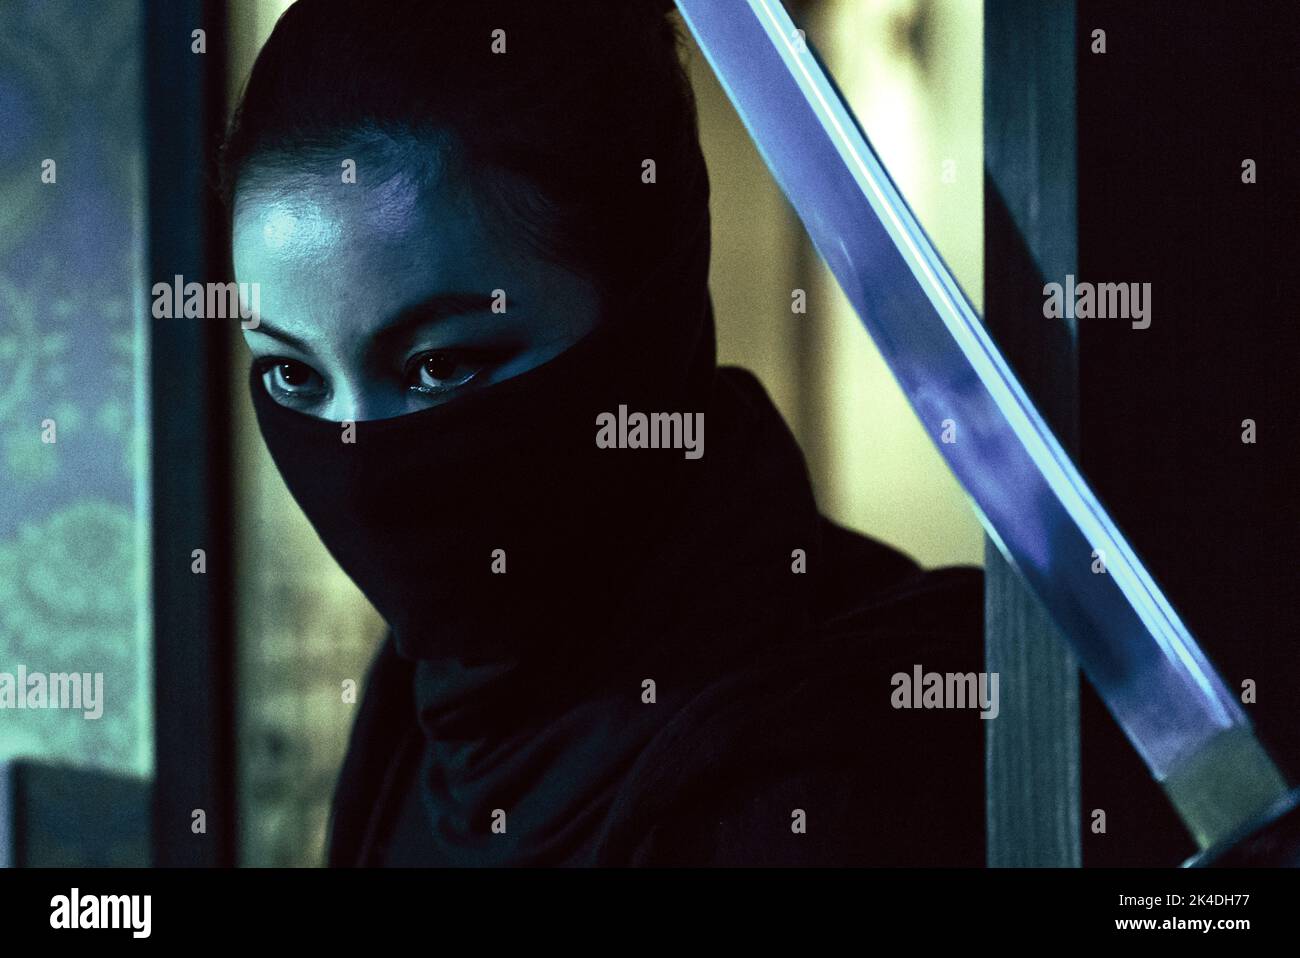 KIM OK-BIN in THE VILLAINESS (2017) -Original title: AKNYEO-, directed by BYUNG-GIL JUNG. Credit: Next Entertainment World / Album Stock Photo